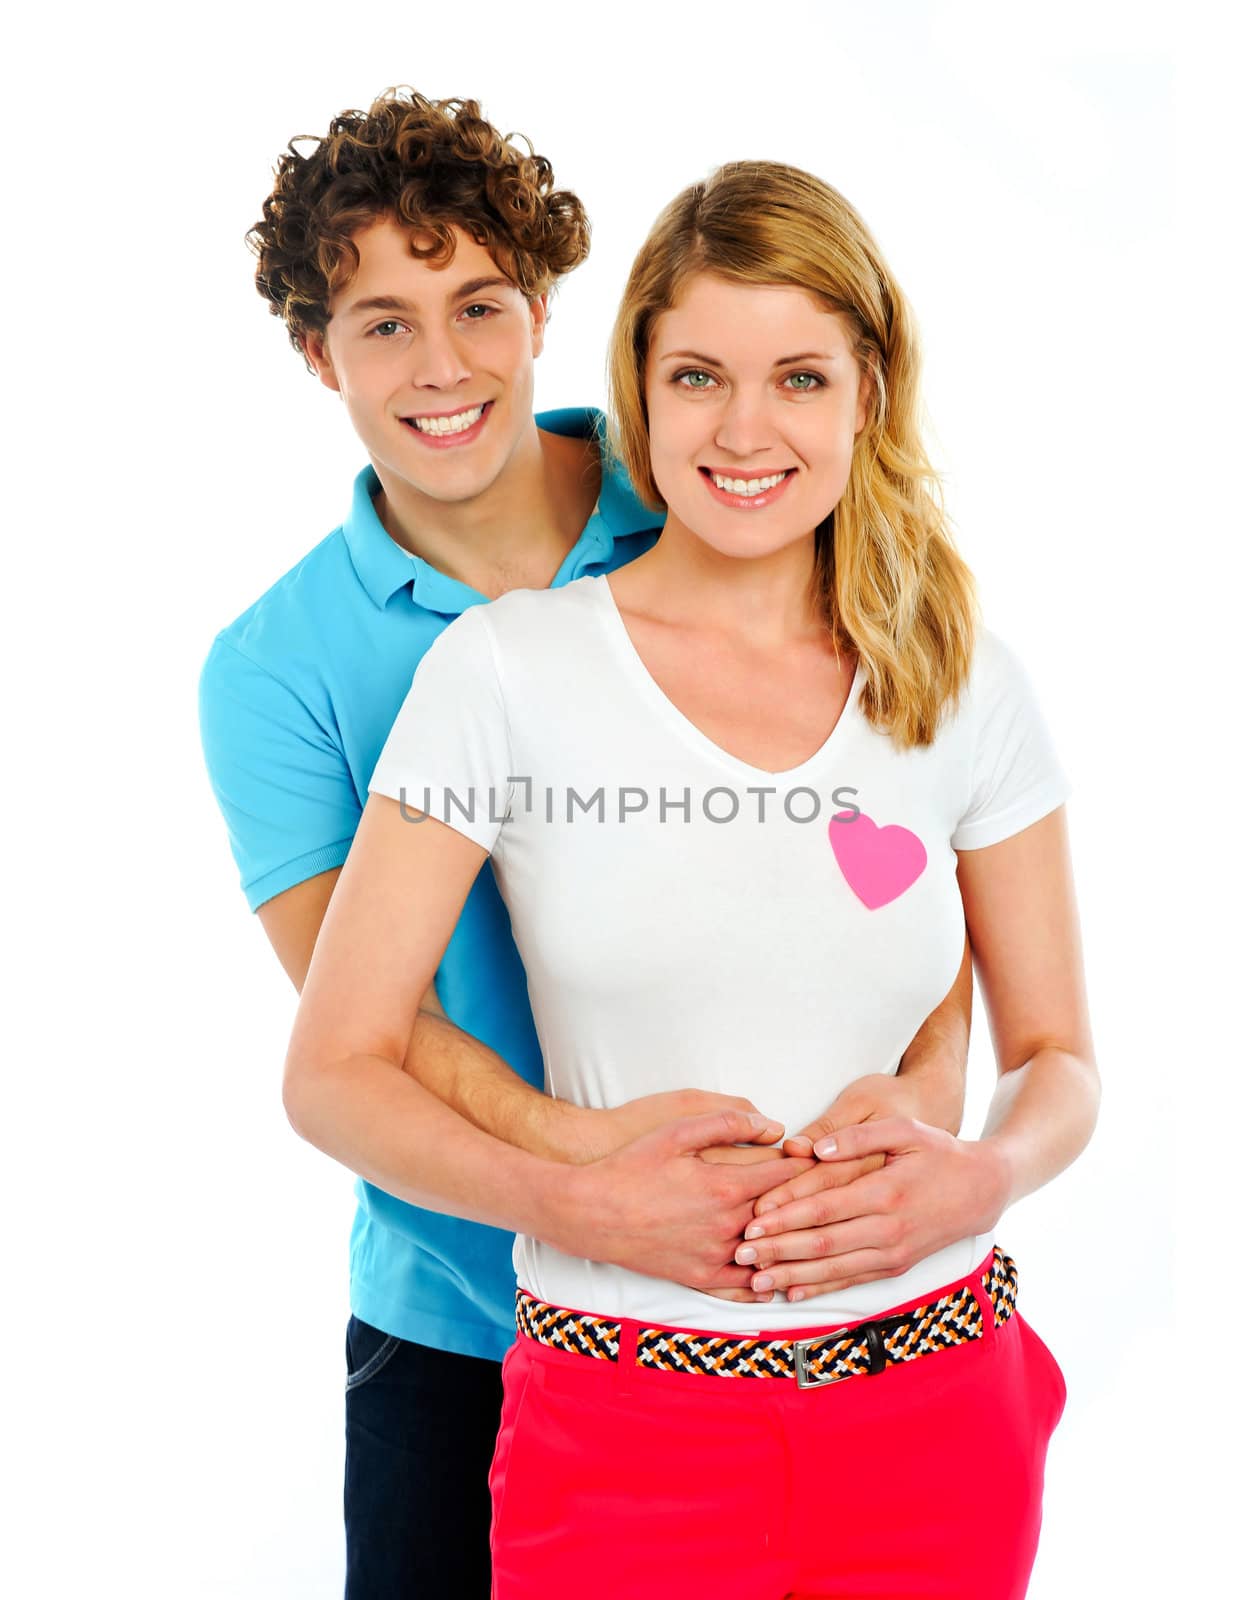 Smiling young couple standing together, posing in studio